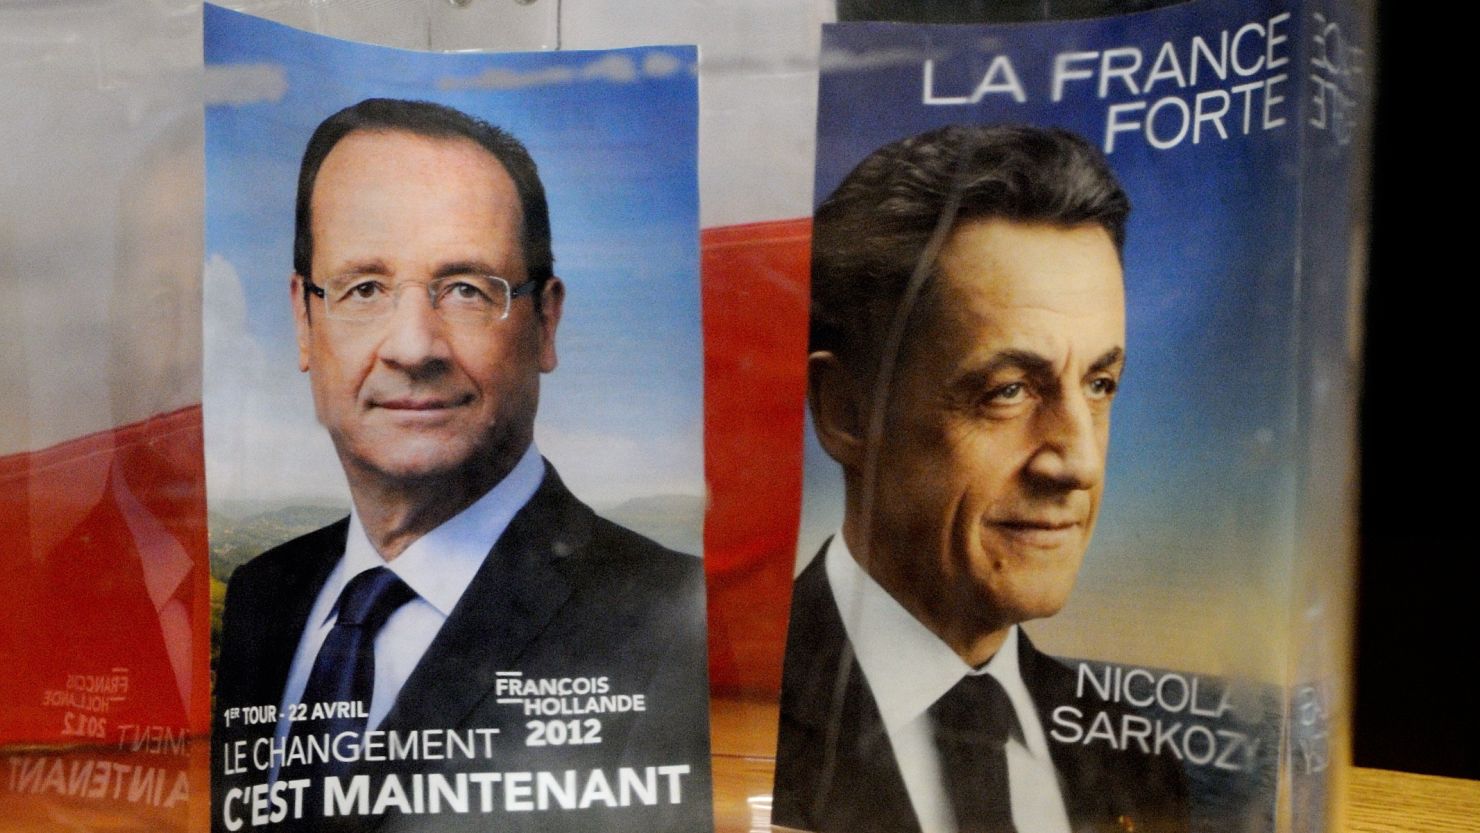 Friday is the last official day of campaigning for France's presidential candidates.